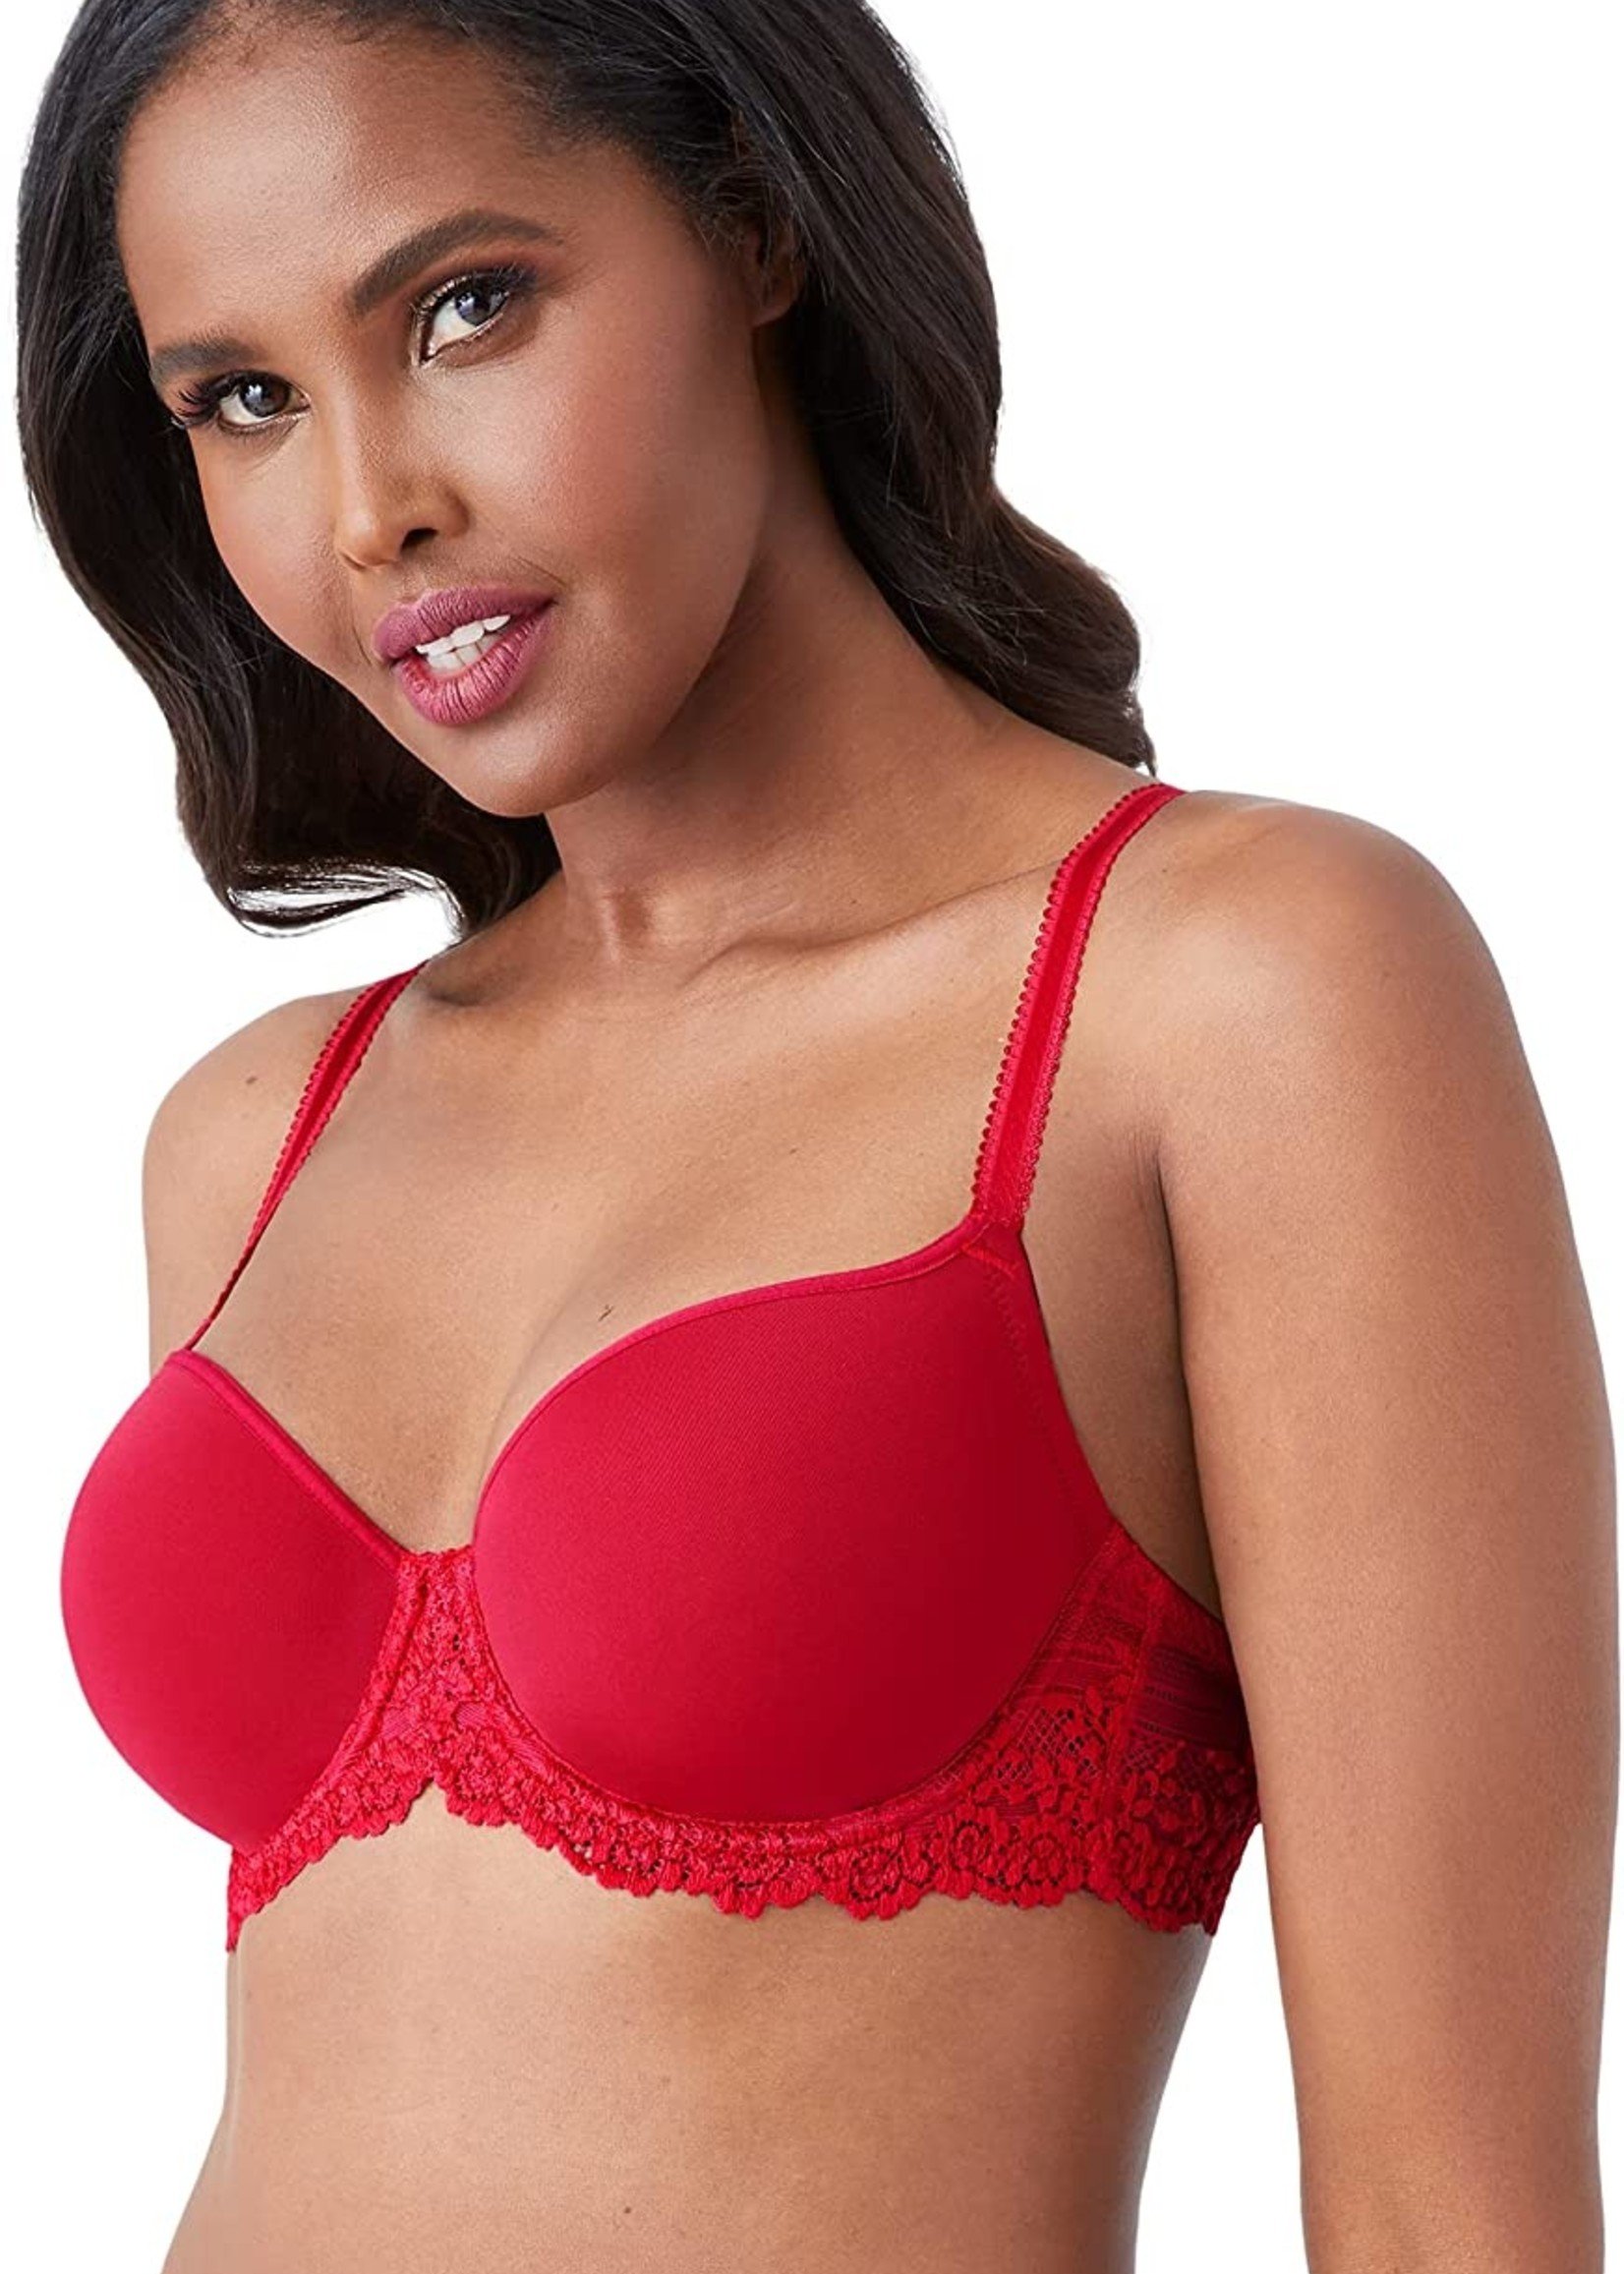 Underwire T-Shirt Bra with Lace Wings - tiVOGLIO